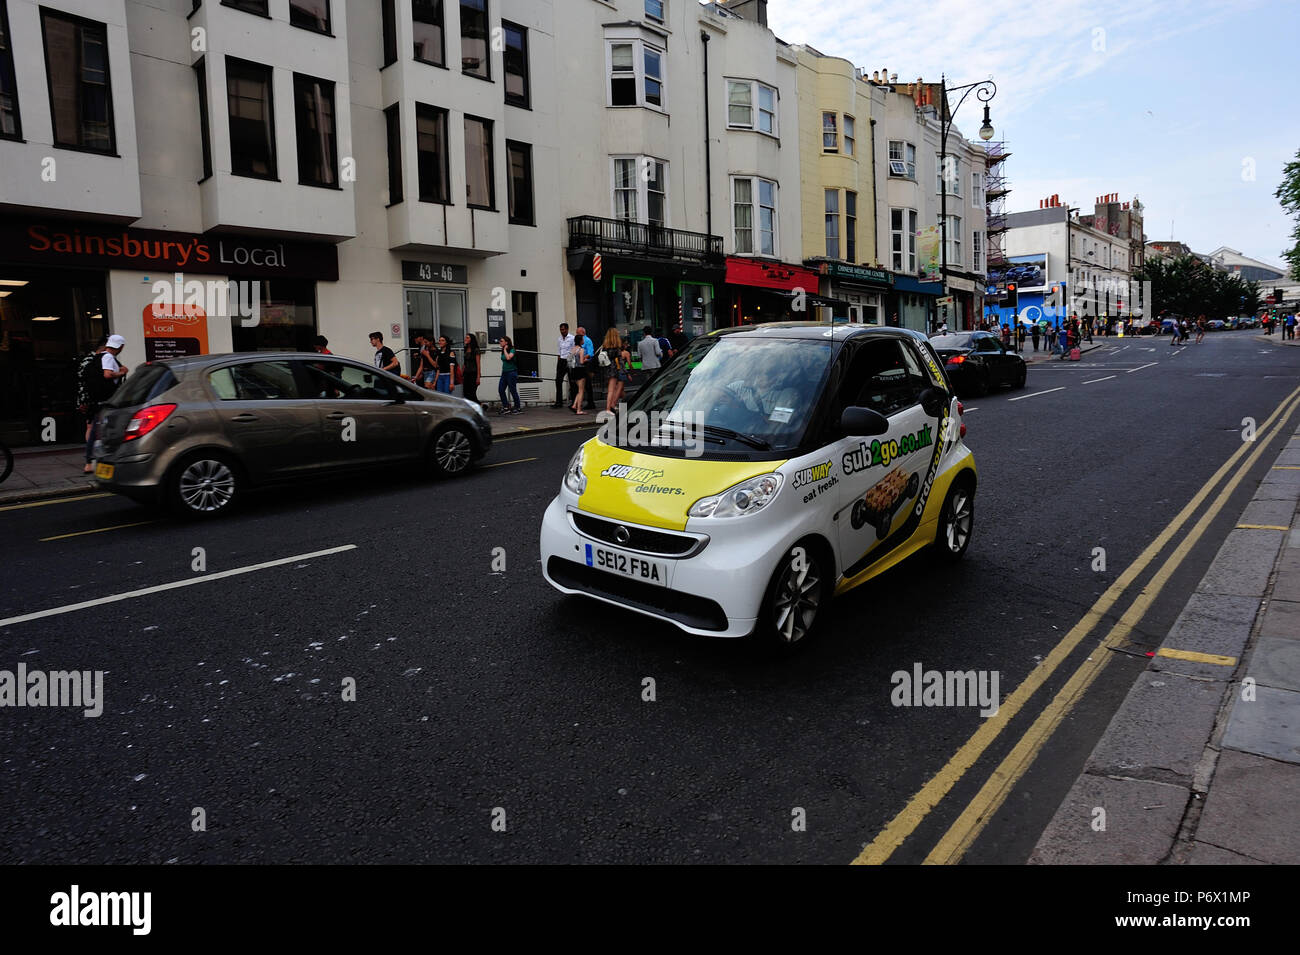 Subway smartcar making a delivery in Brighton, English Seaside Town, Brighton & Hove, East Sussex, England, UK Stock Photo